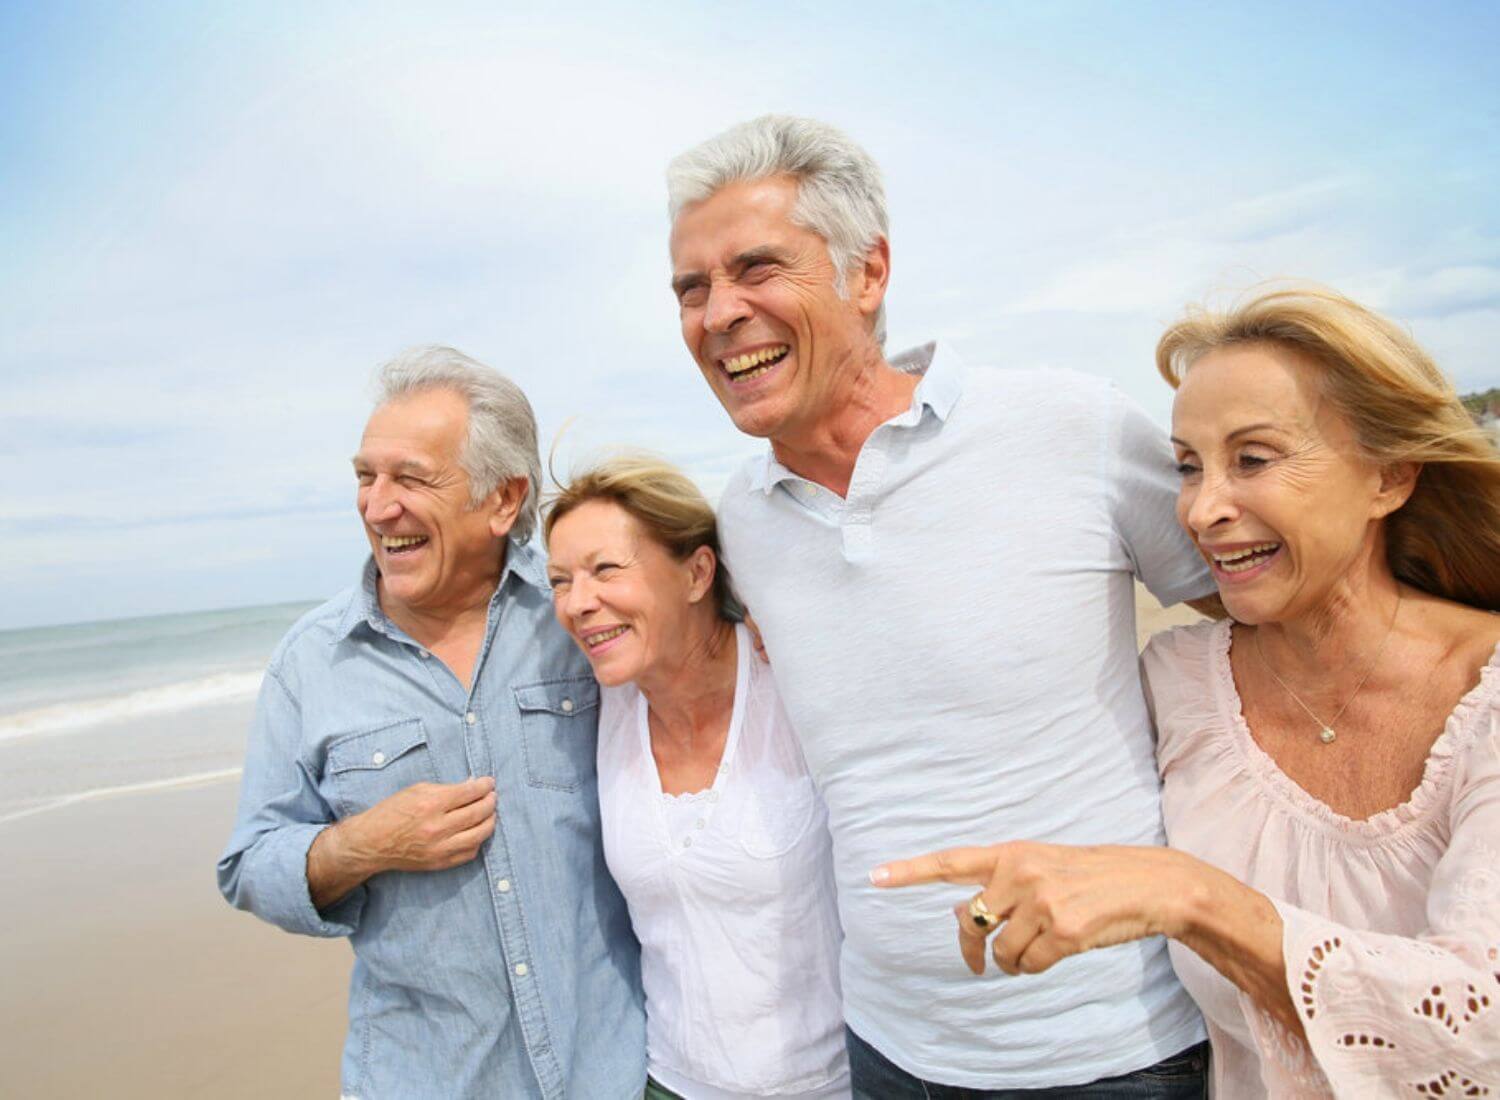 5 Activities For The Old People Which Can Make Them Entrepreneurs